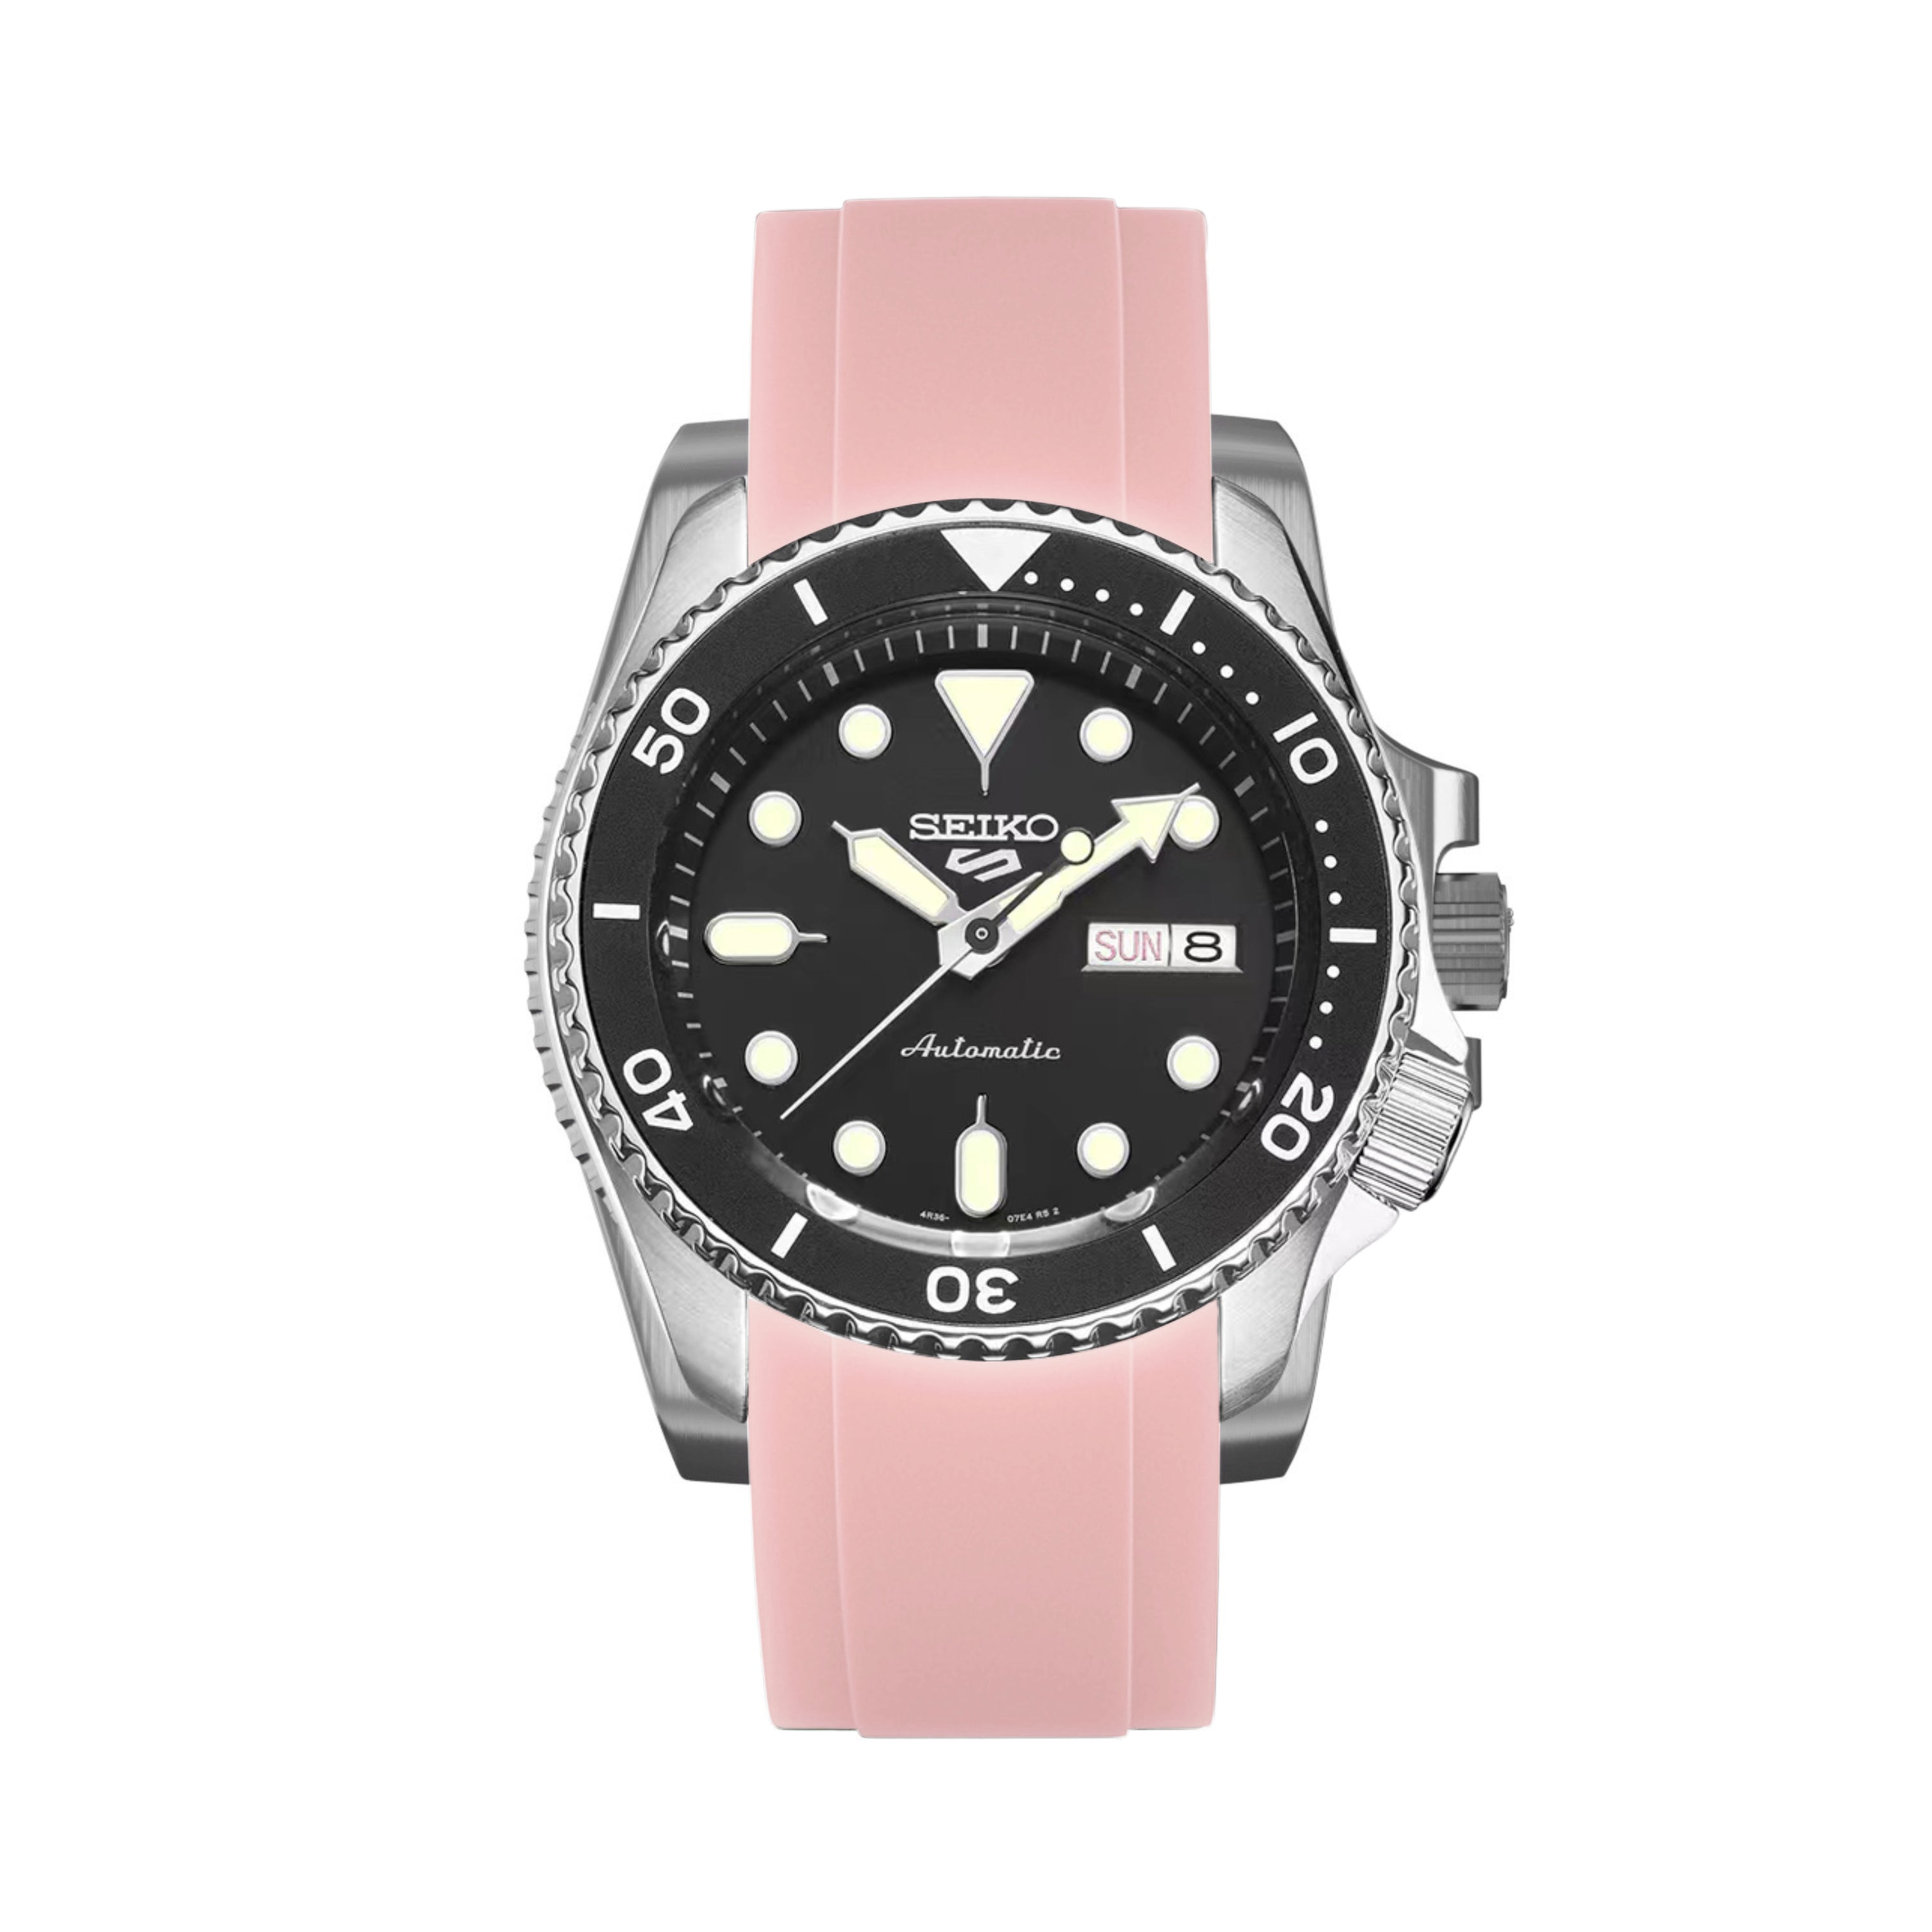 Curved End Soft Silicone Strap - Compatible with Seiko SKX - Light Pink (2418)